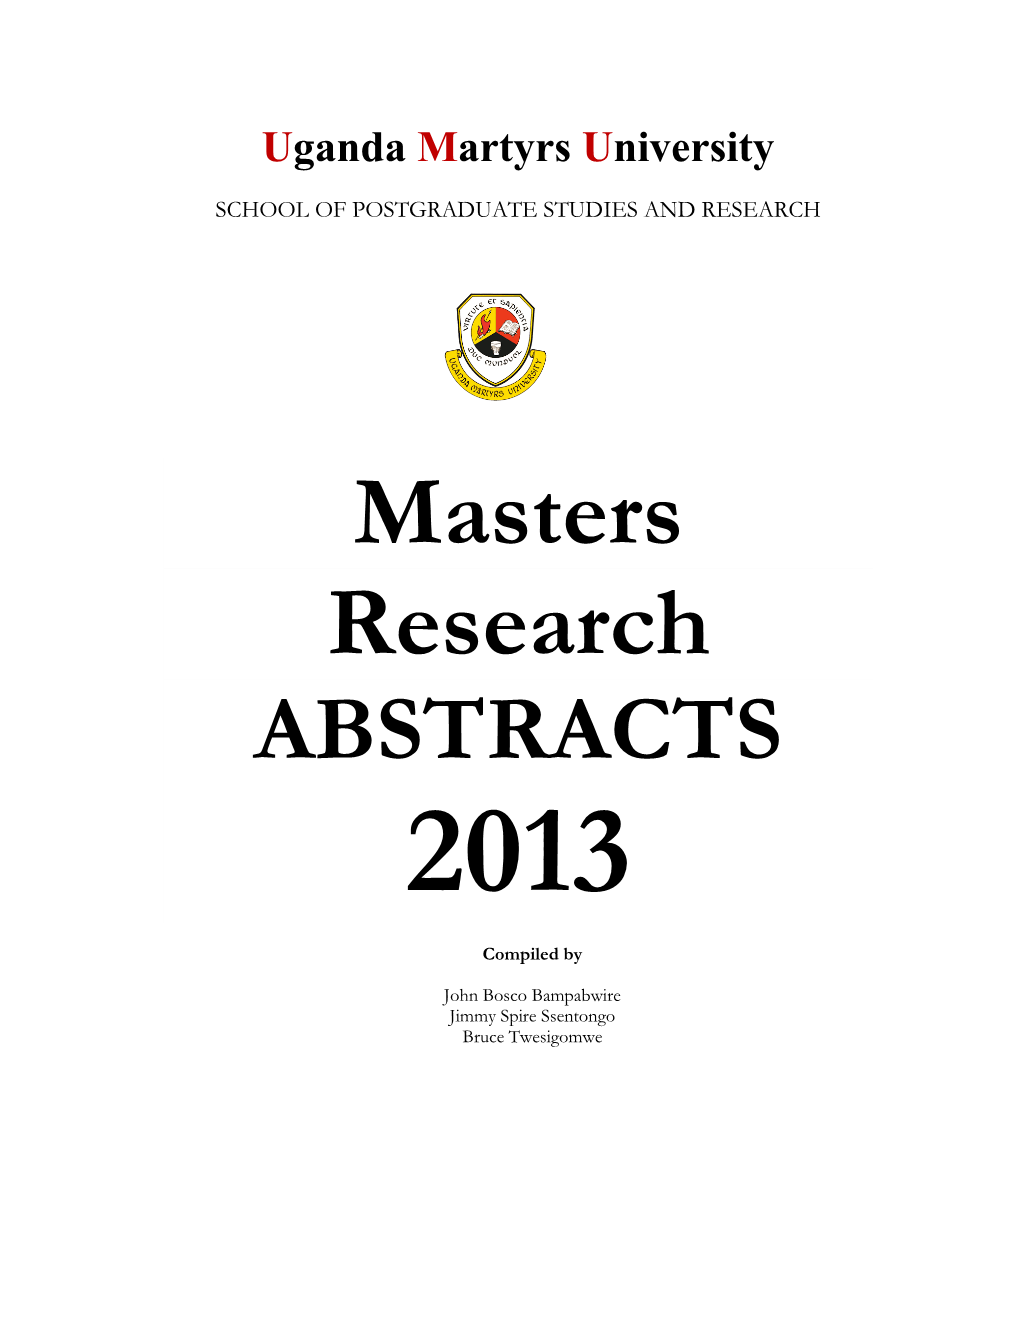 Masters Research ABSTRACTS 2013